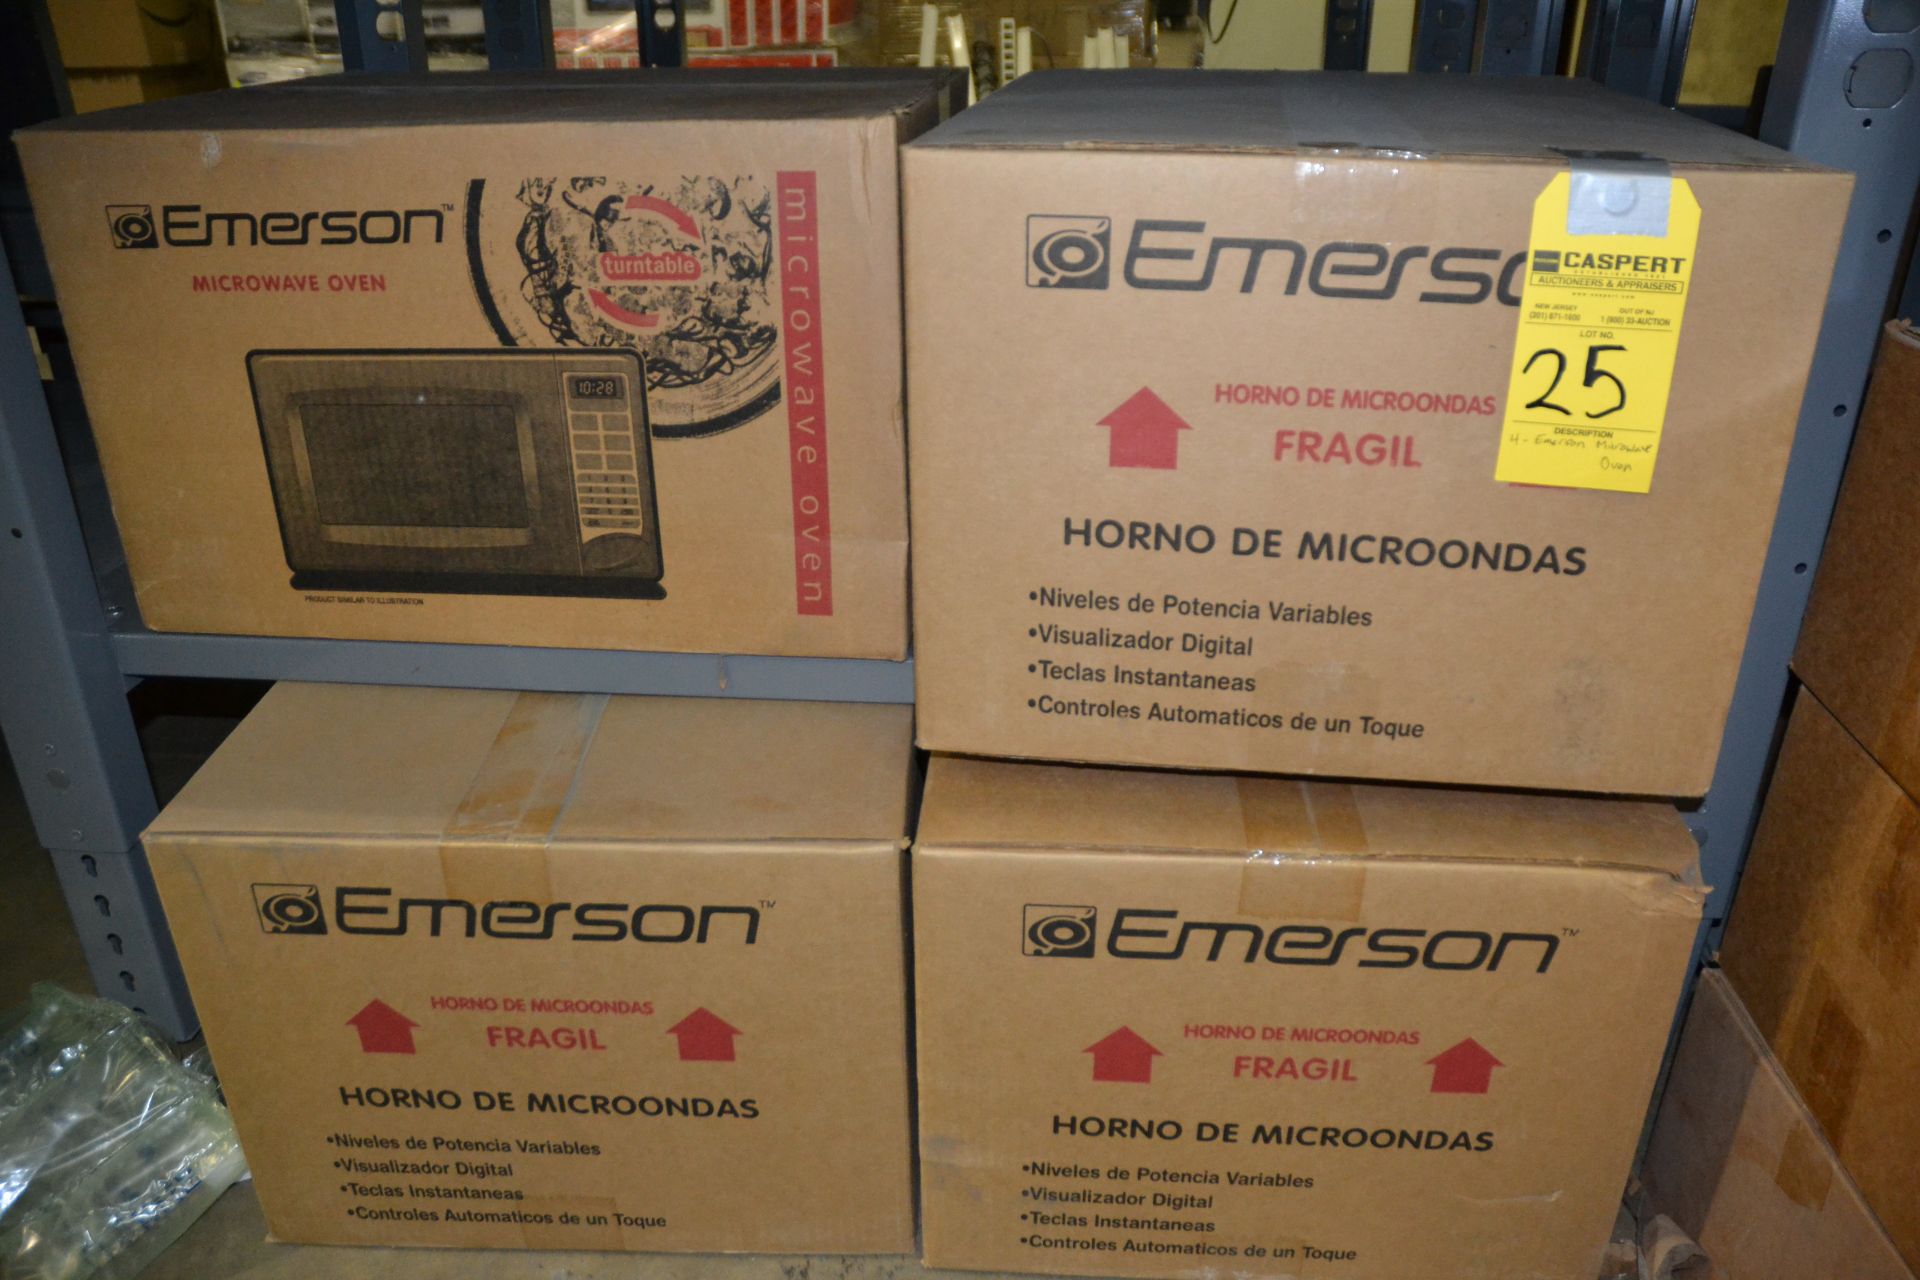 EMERSON MICROWAVE OVENS